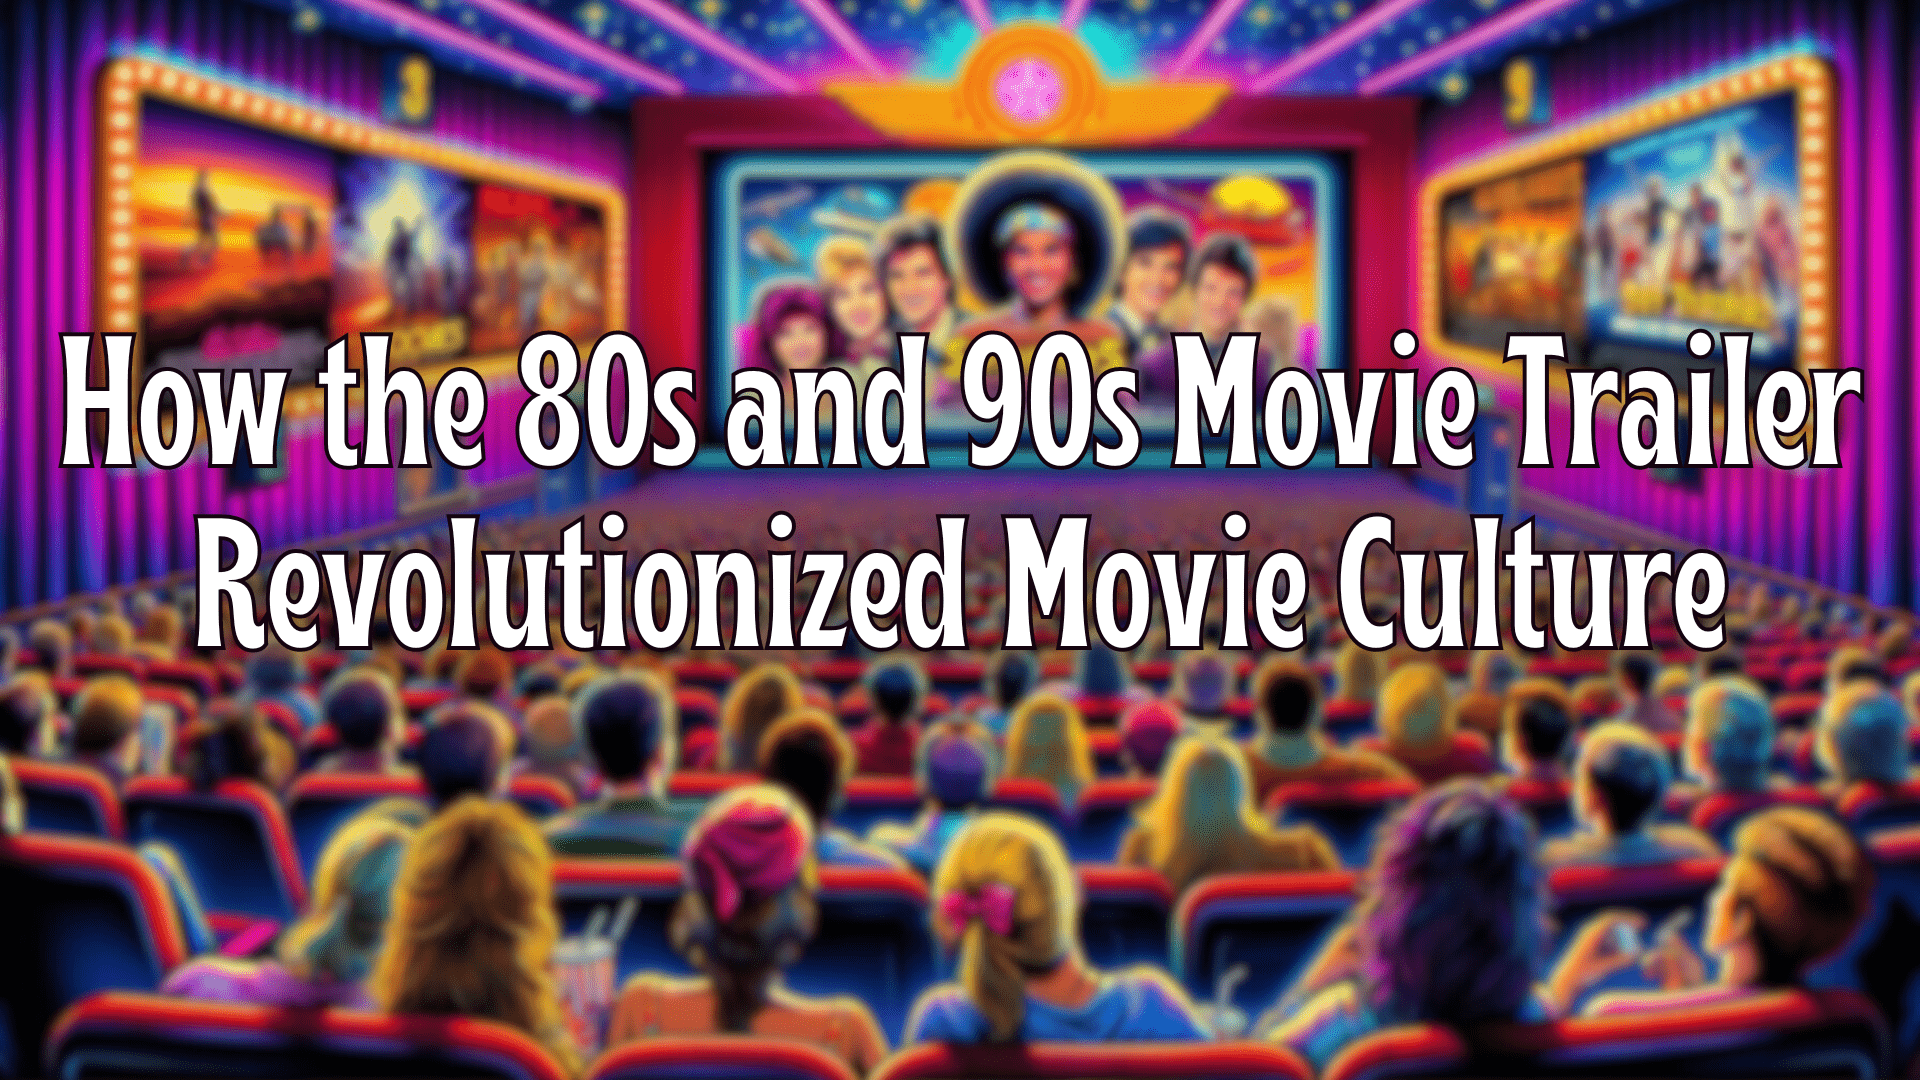 How the 80s and 90s Movie Trailer Revolutionized Movie Culture